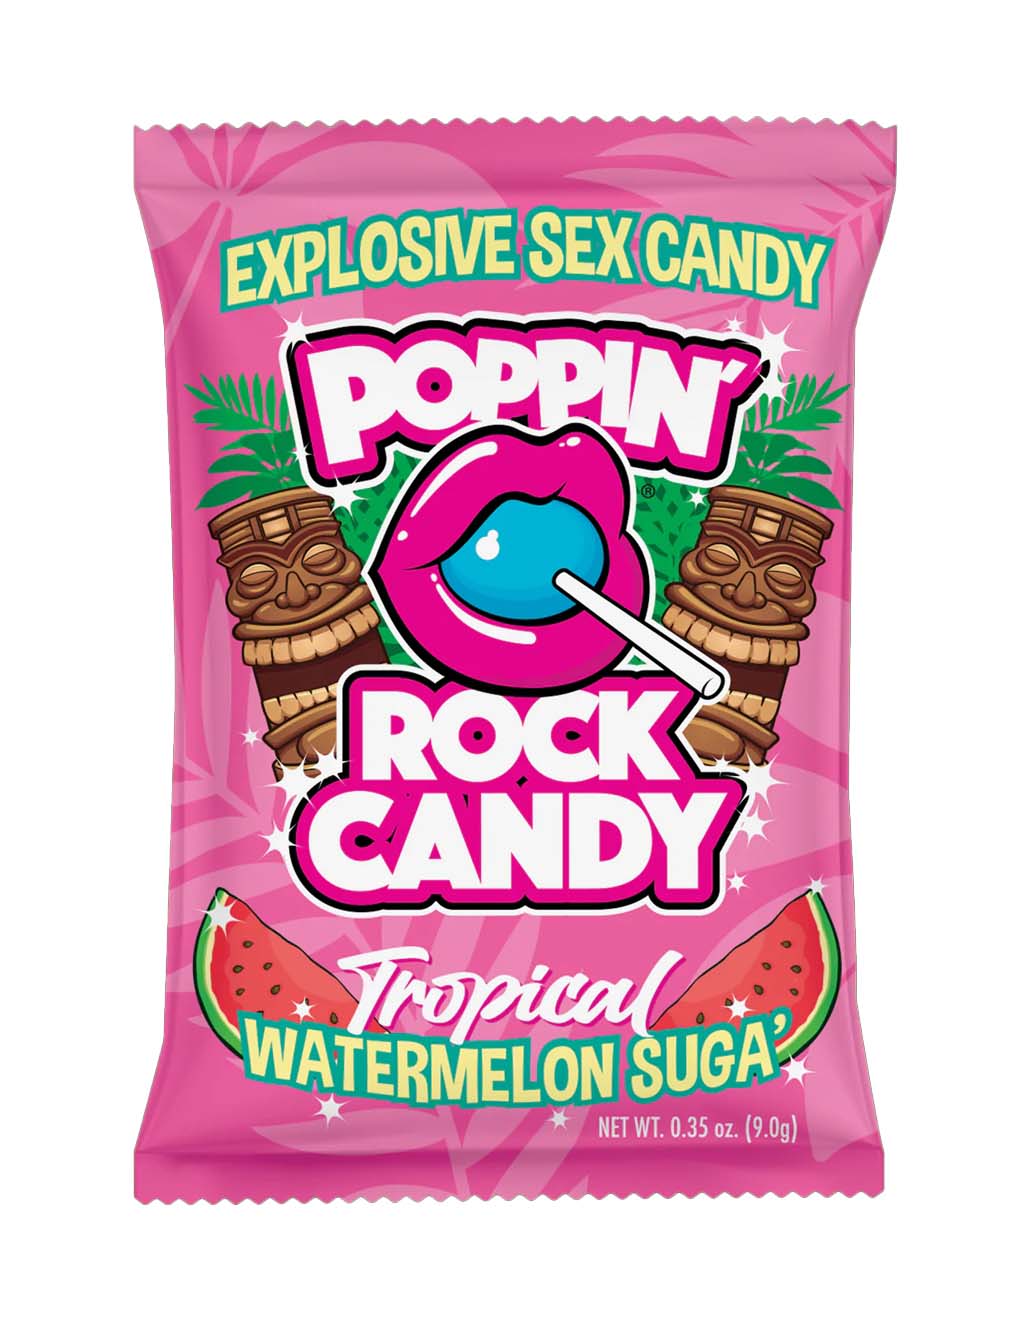 Rock Candy Popping Rock BJ Candy- Watermelon Suga